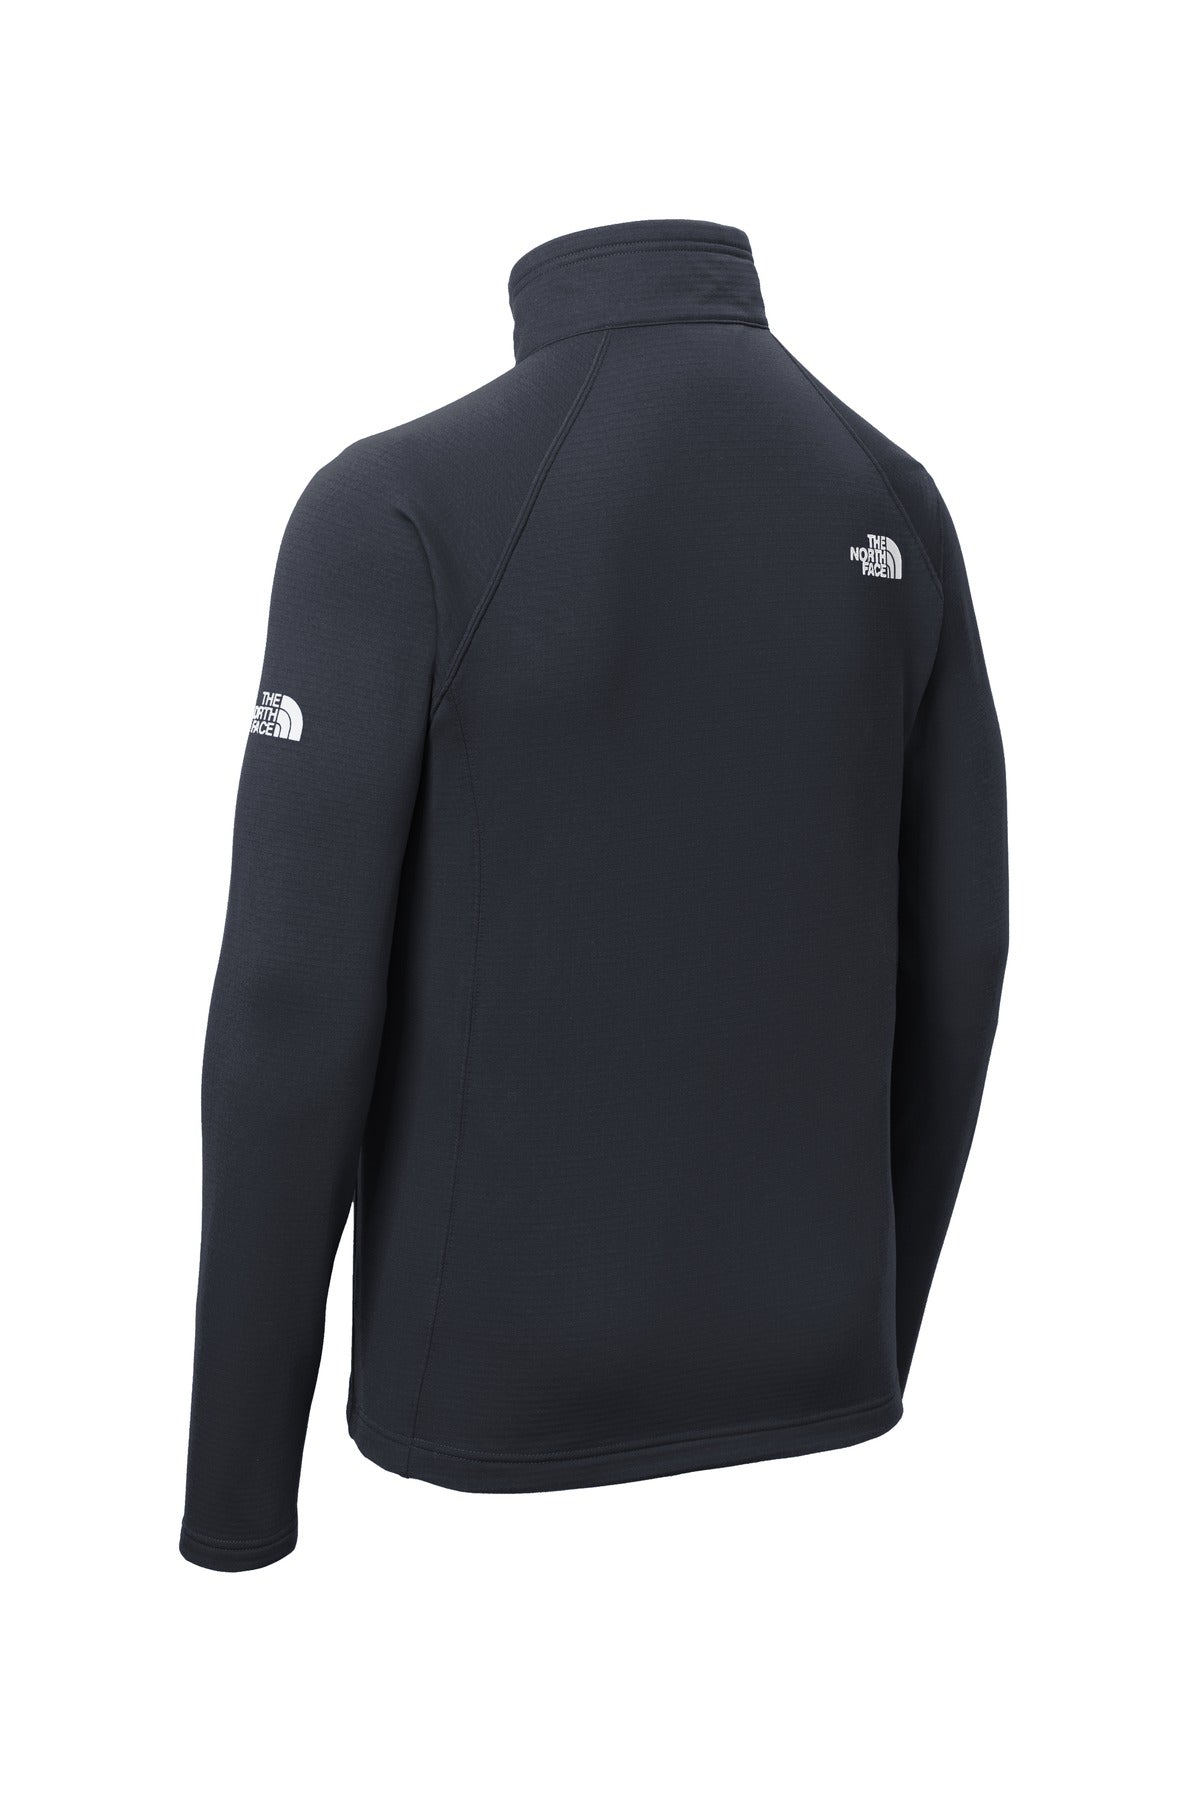 The North Face Mountain Peaks 1/4-Zip Fleece NF0A47FB